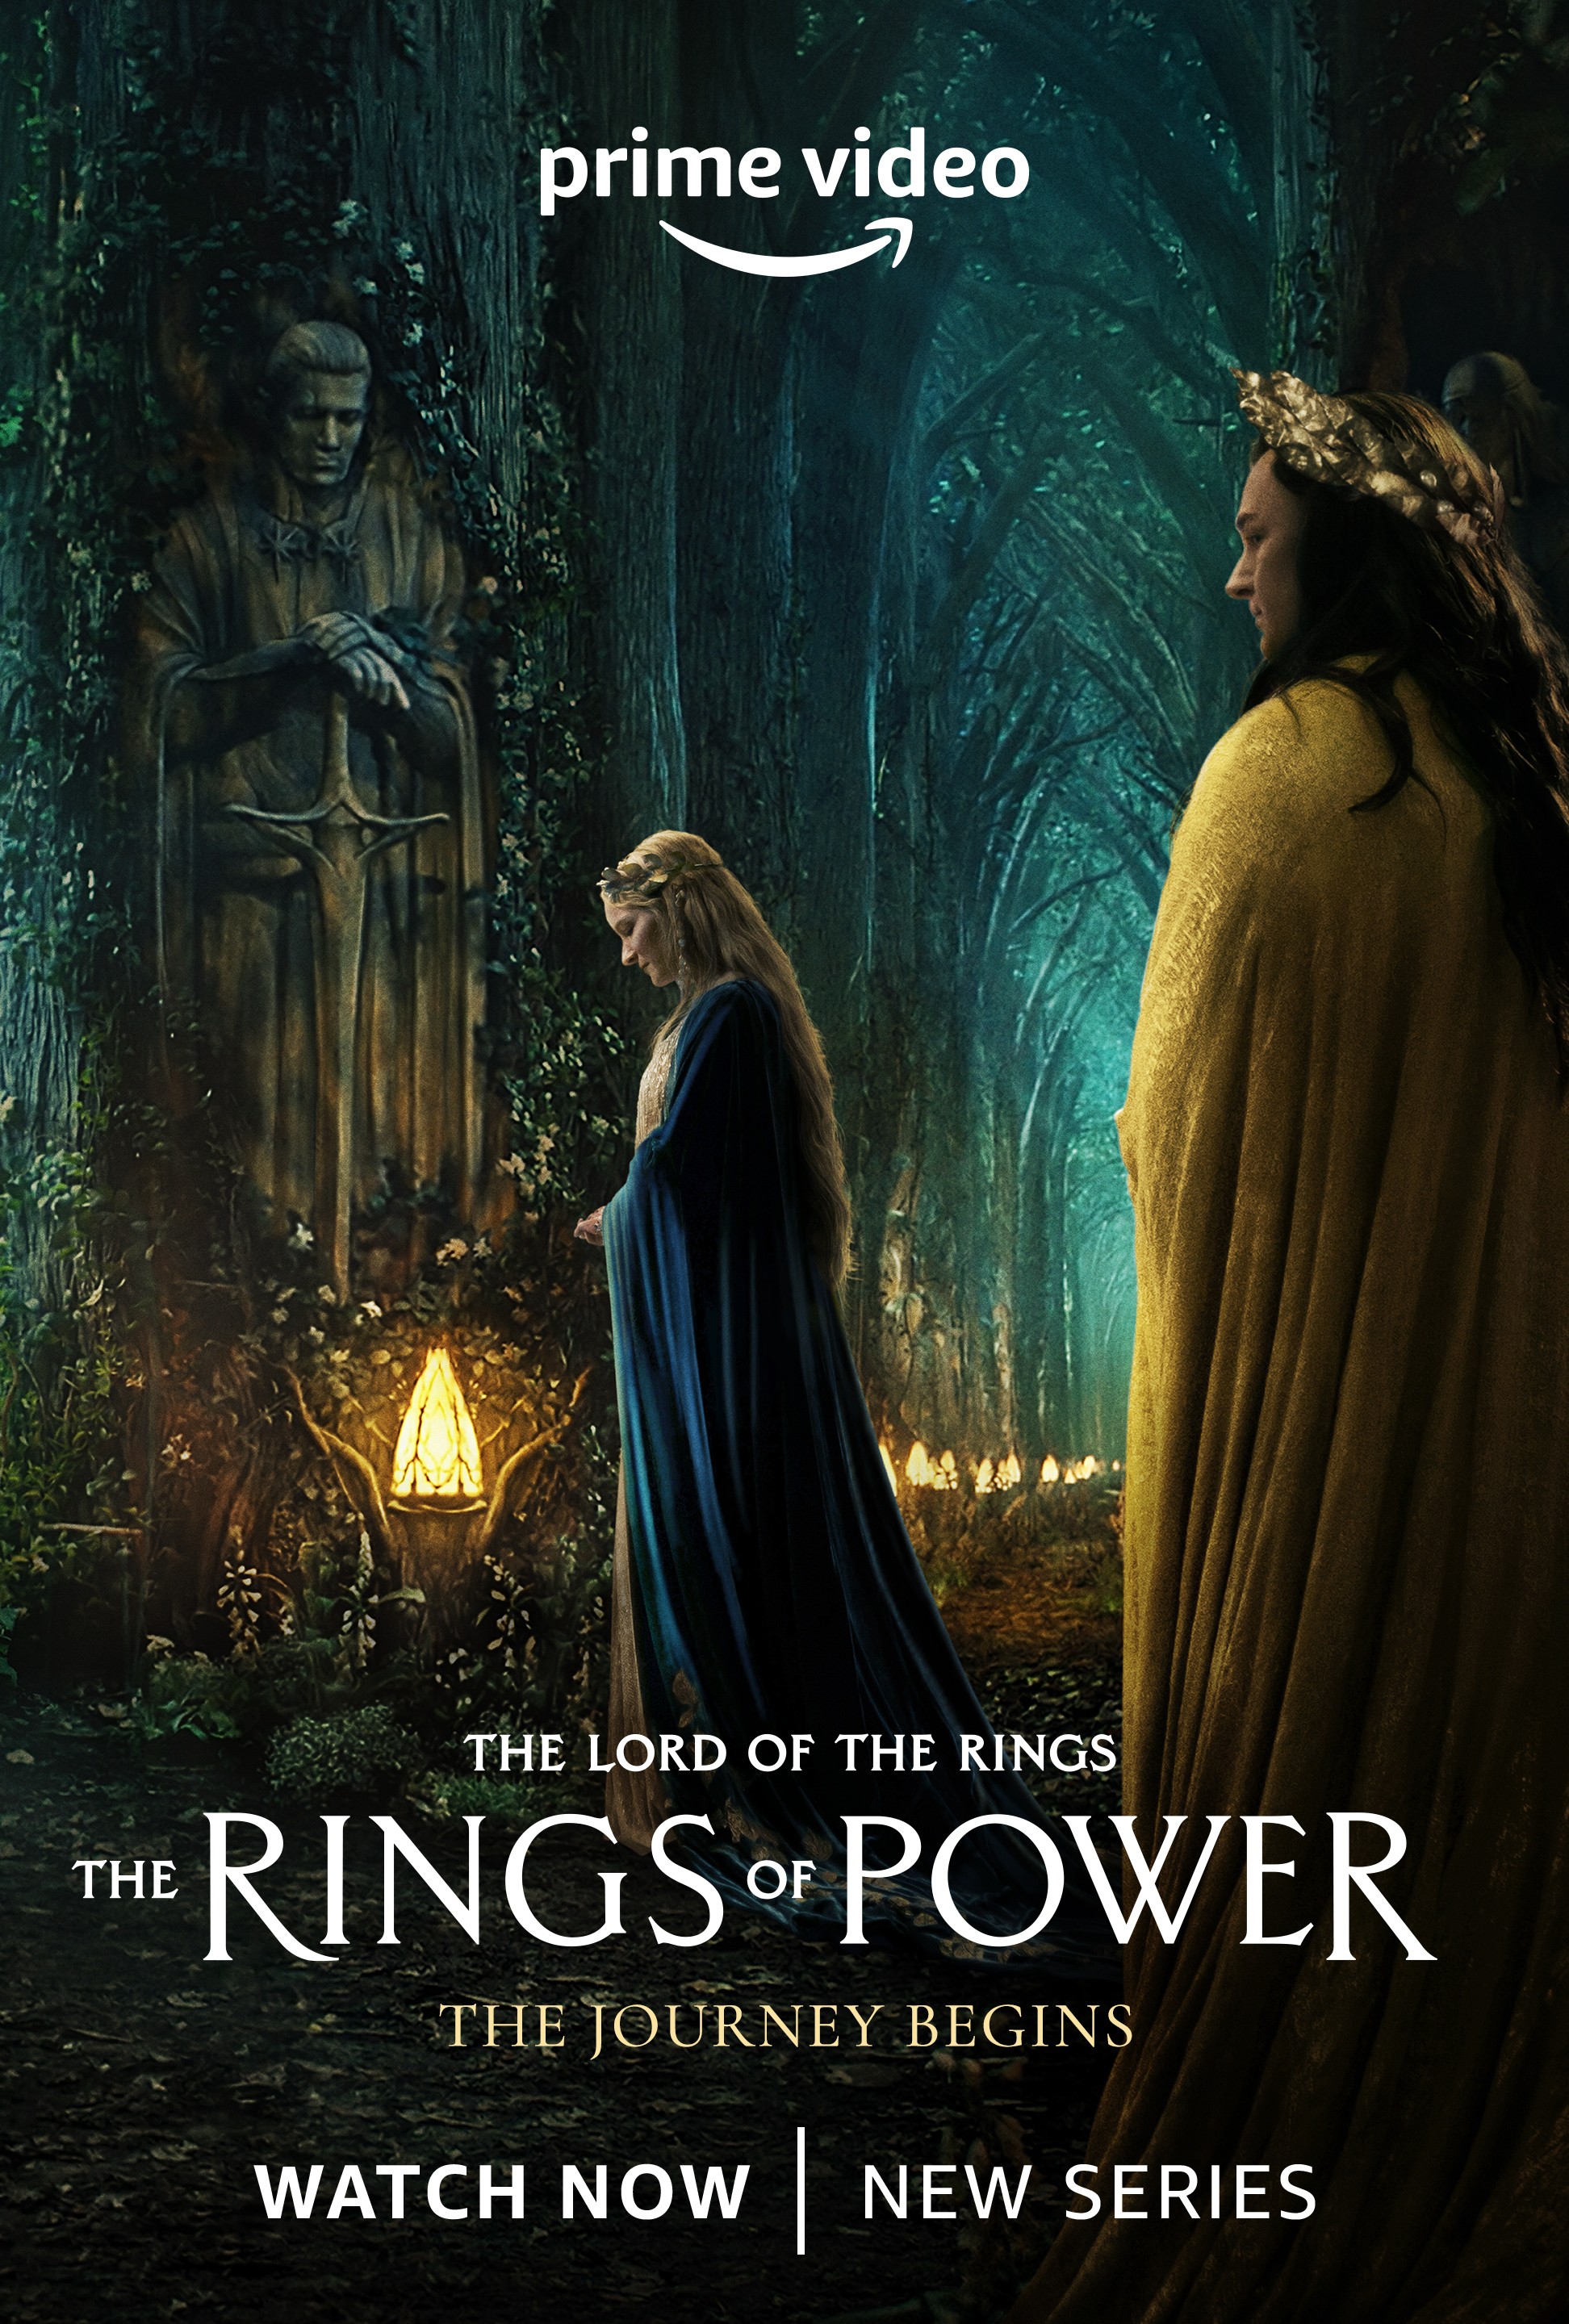 Overtekenen Arctic Correct The Lord of the Rings: The Rings of Power - Rotten Tomatoes